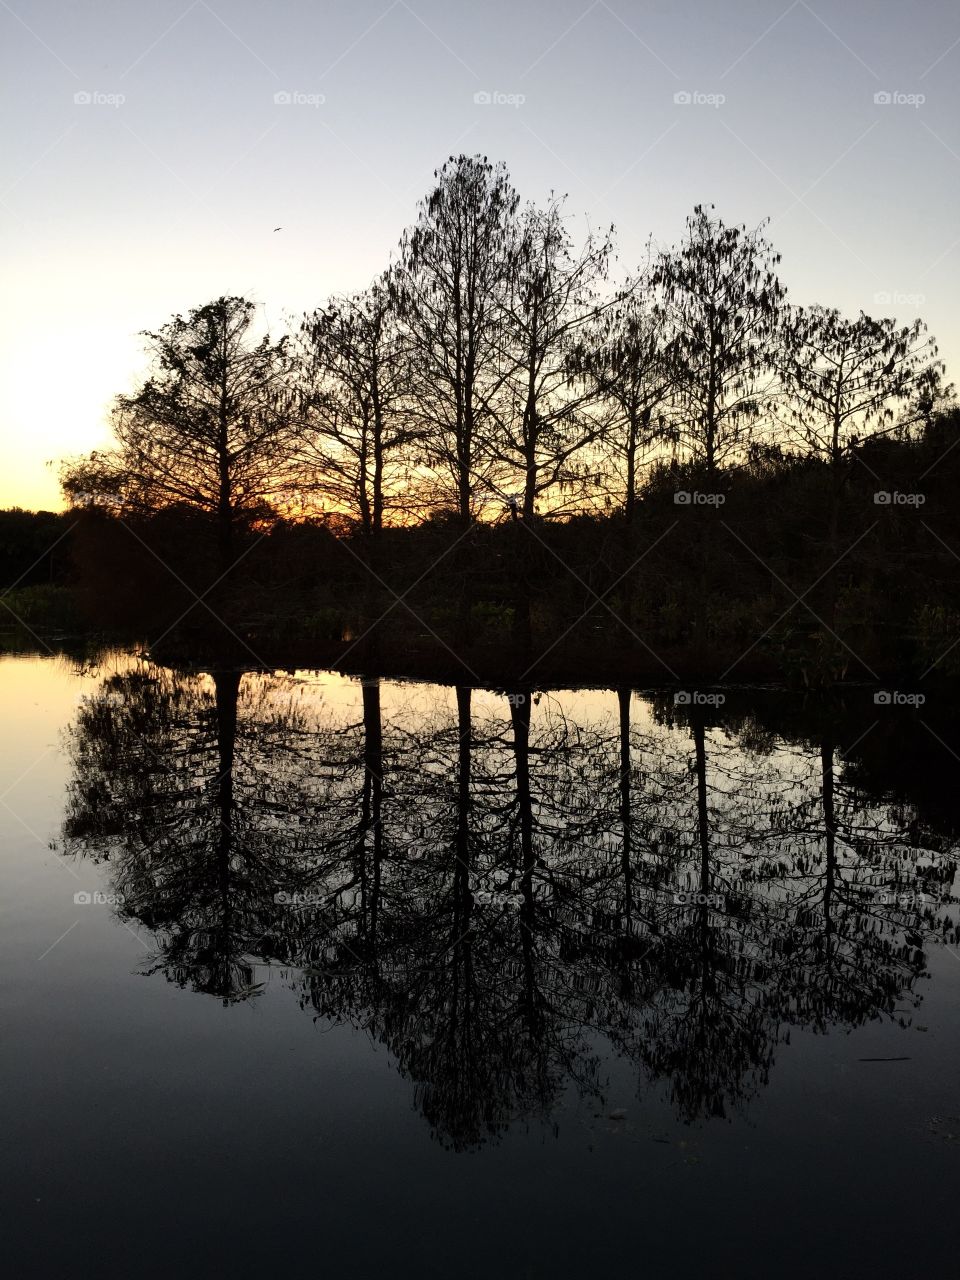 This was taken at Green Cay Wetlands during sunrise.